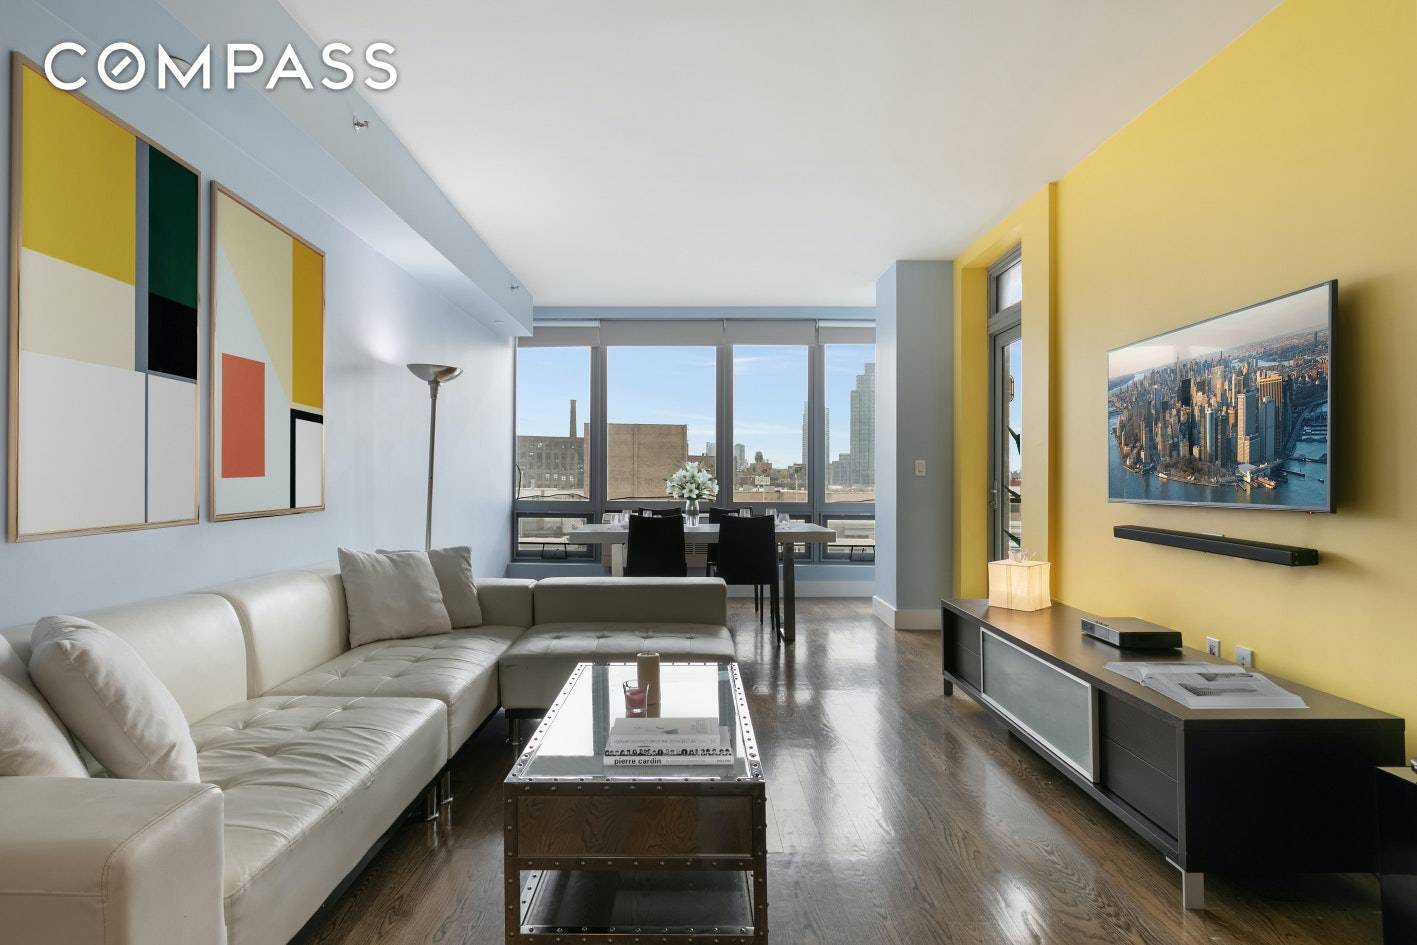 Rare gem layout at the sought after One Hunters Point condos located 2 blocks from the 7 train and ferry.